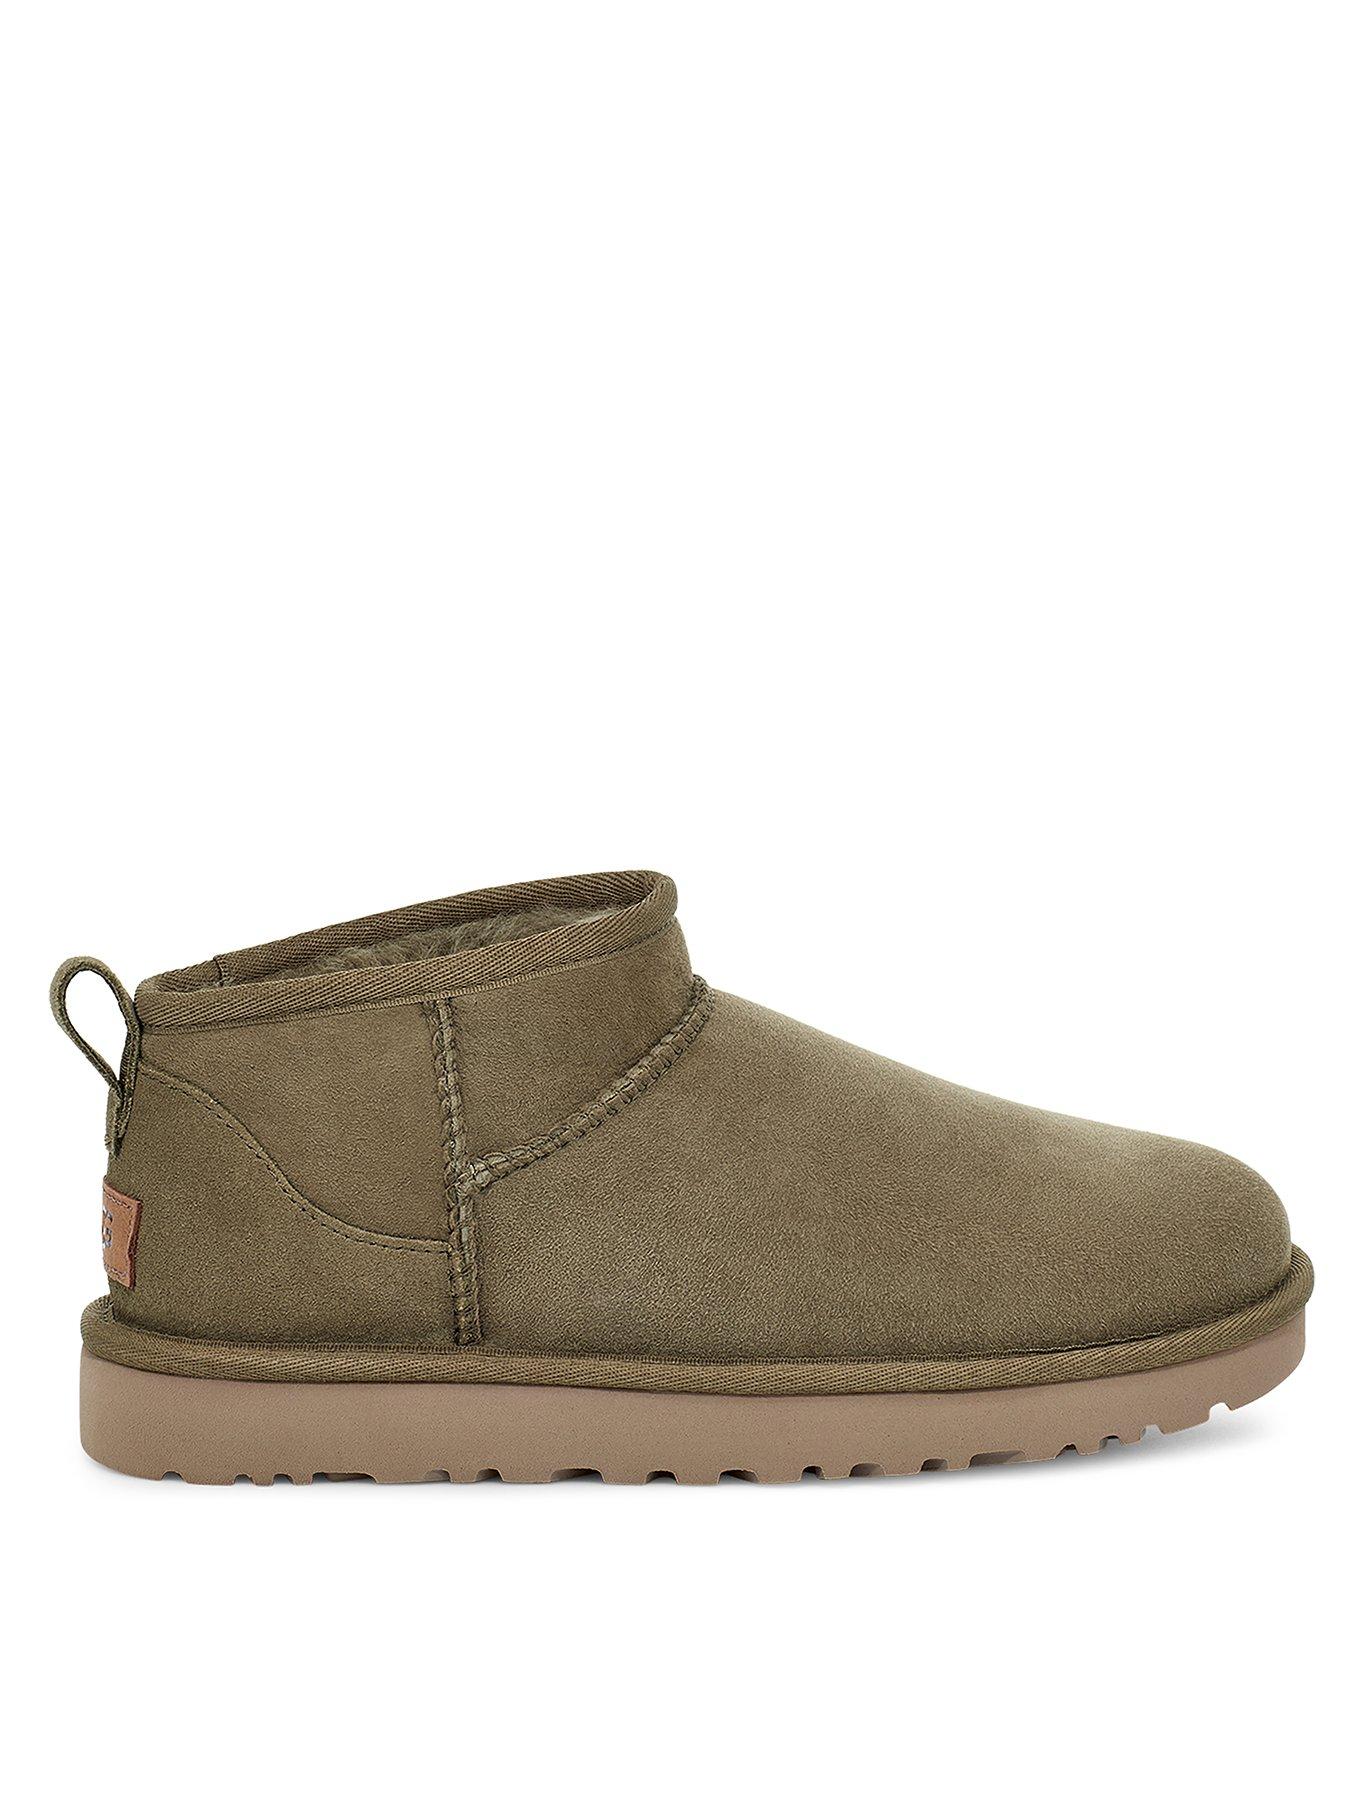 UGG Classic Ultra Mini Ankle Boots - Antelope | very.co.uk